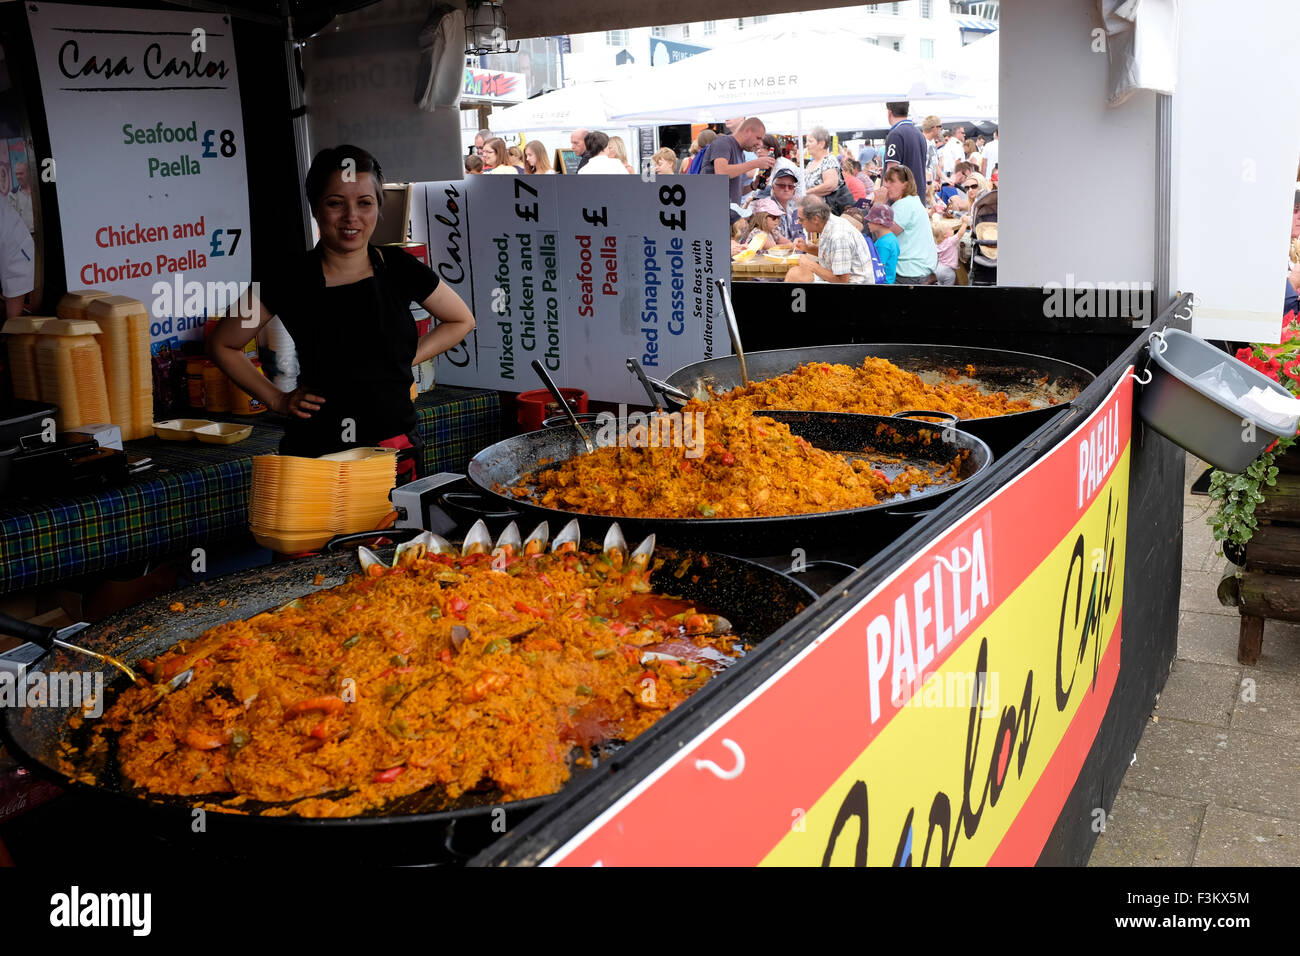 Cowes Week, 2015, Isle of Wight Paella stand take away Cowes Week, 2015, Isle of Wight The Parade spectators Yacht Racing, Shore side entertainments, Bands, Yacht Club scenes, 2015, Cowes Week, Isle of Wight, England, UK, Stock Photo